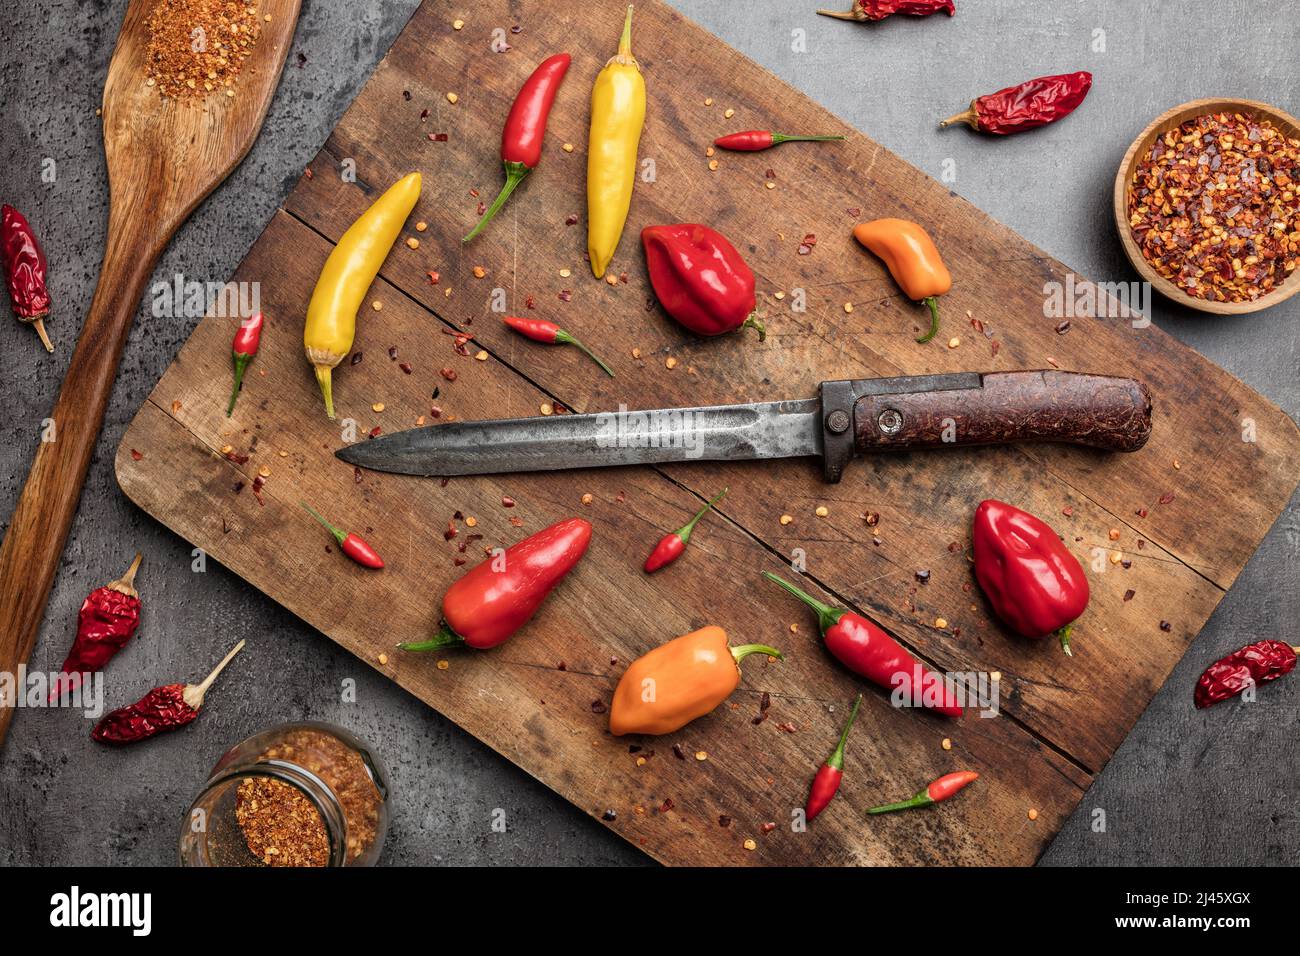 Variety of fresh and dried chili peppers on rustic background Stock Photo